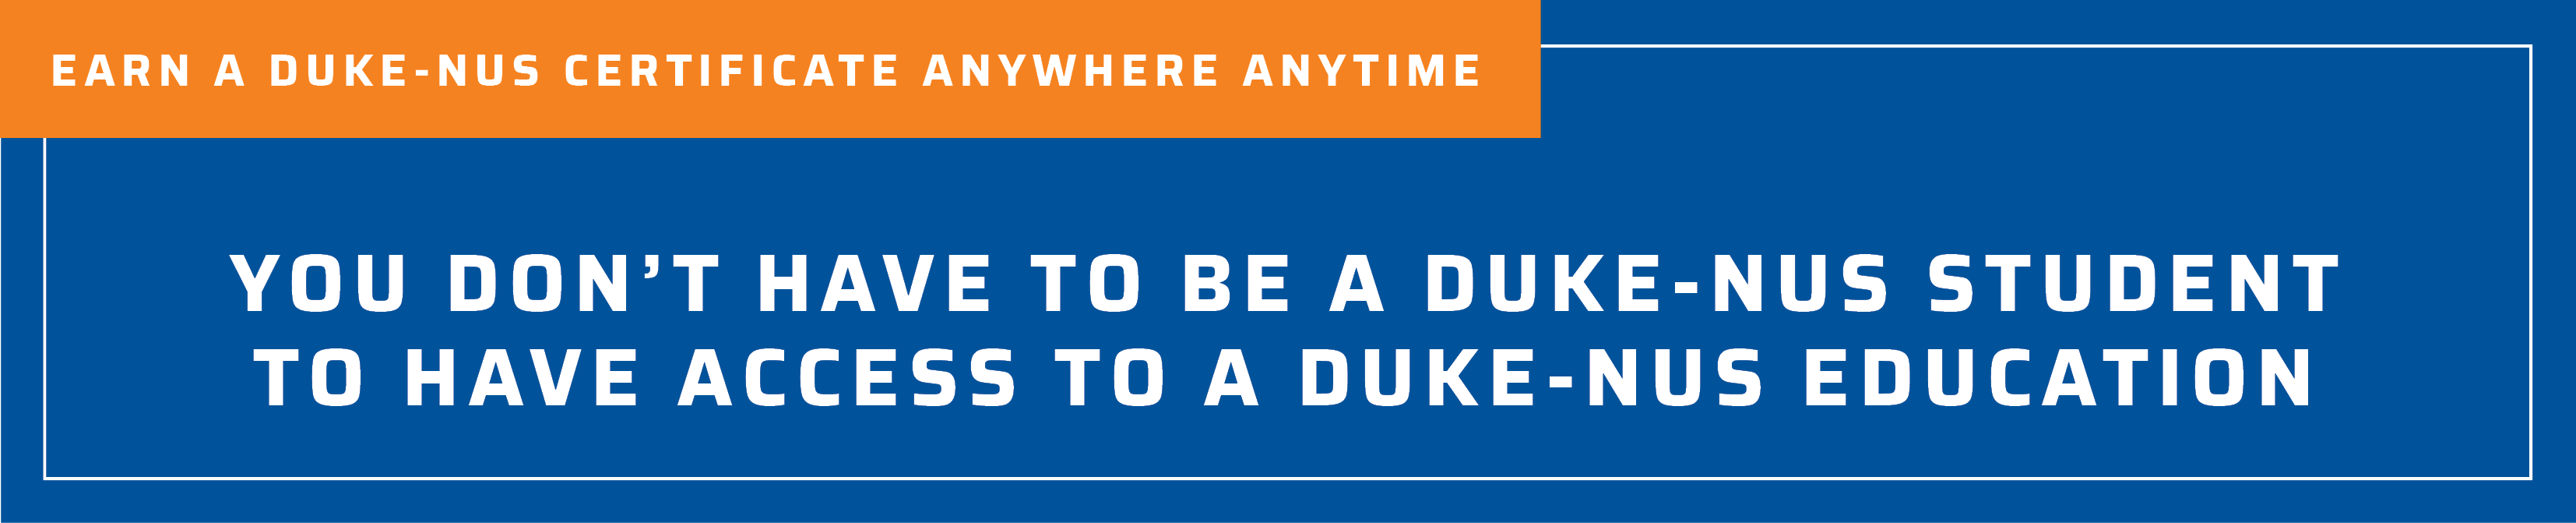 Earn a Duke-NUS Certificate Anywhere Anytime. You don't have to be a Duke-NUS Student to have access to a Duke-NUS Education